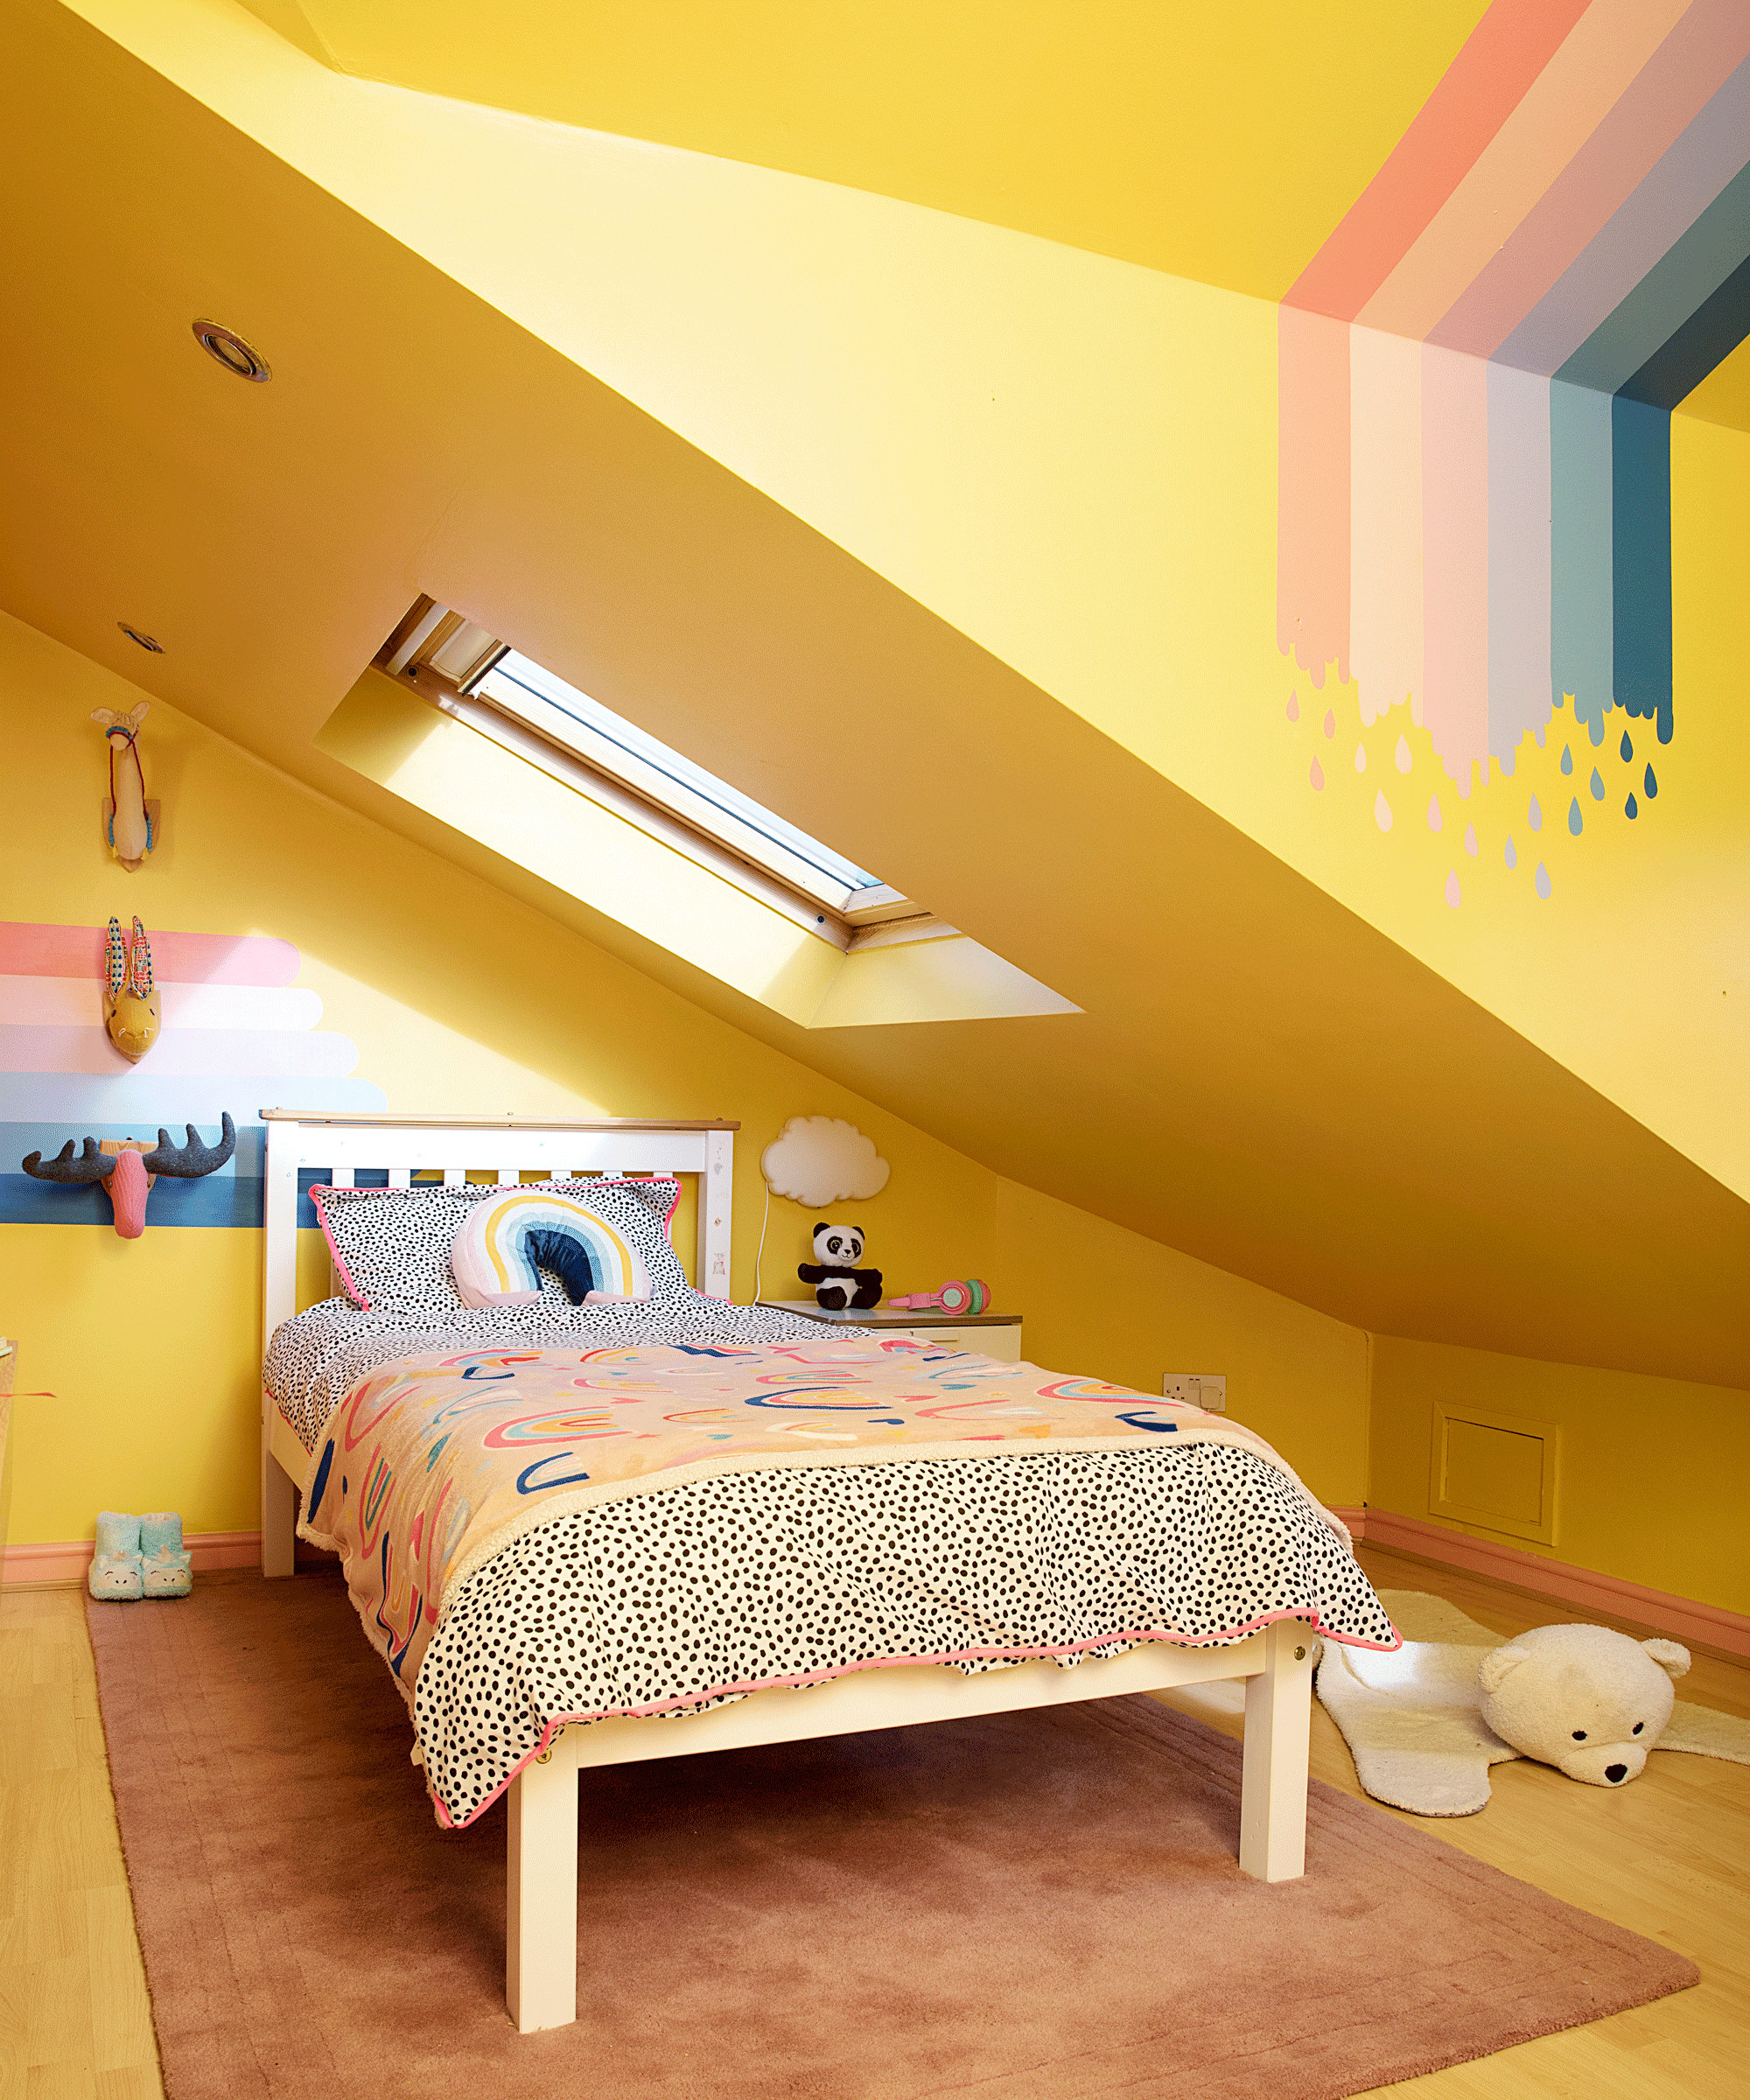 Karen Clough used left over paint to create a rainbow bedroom for less than £100